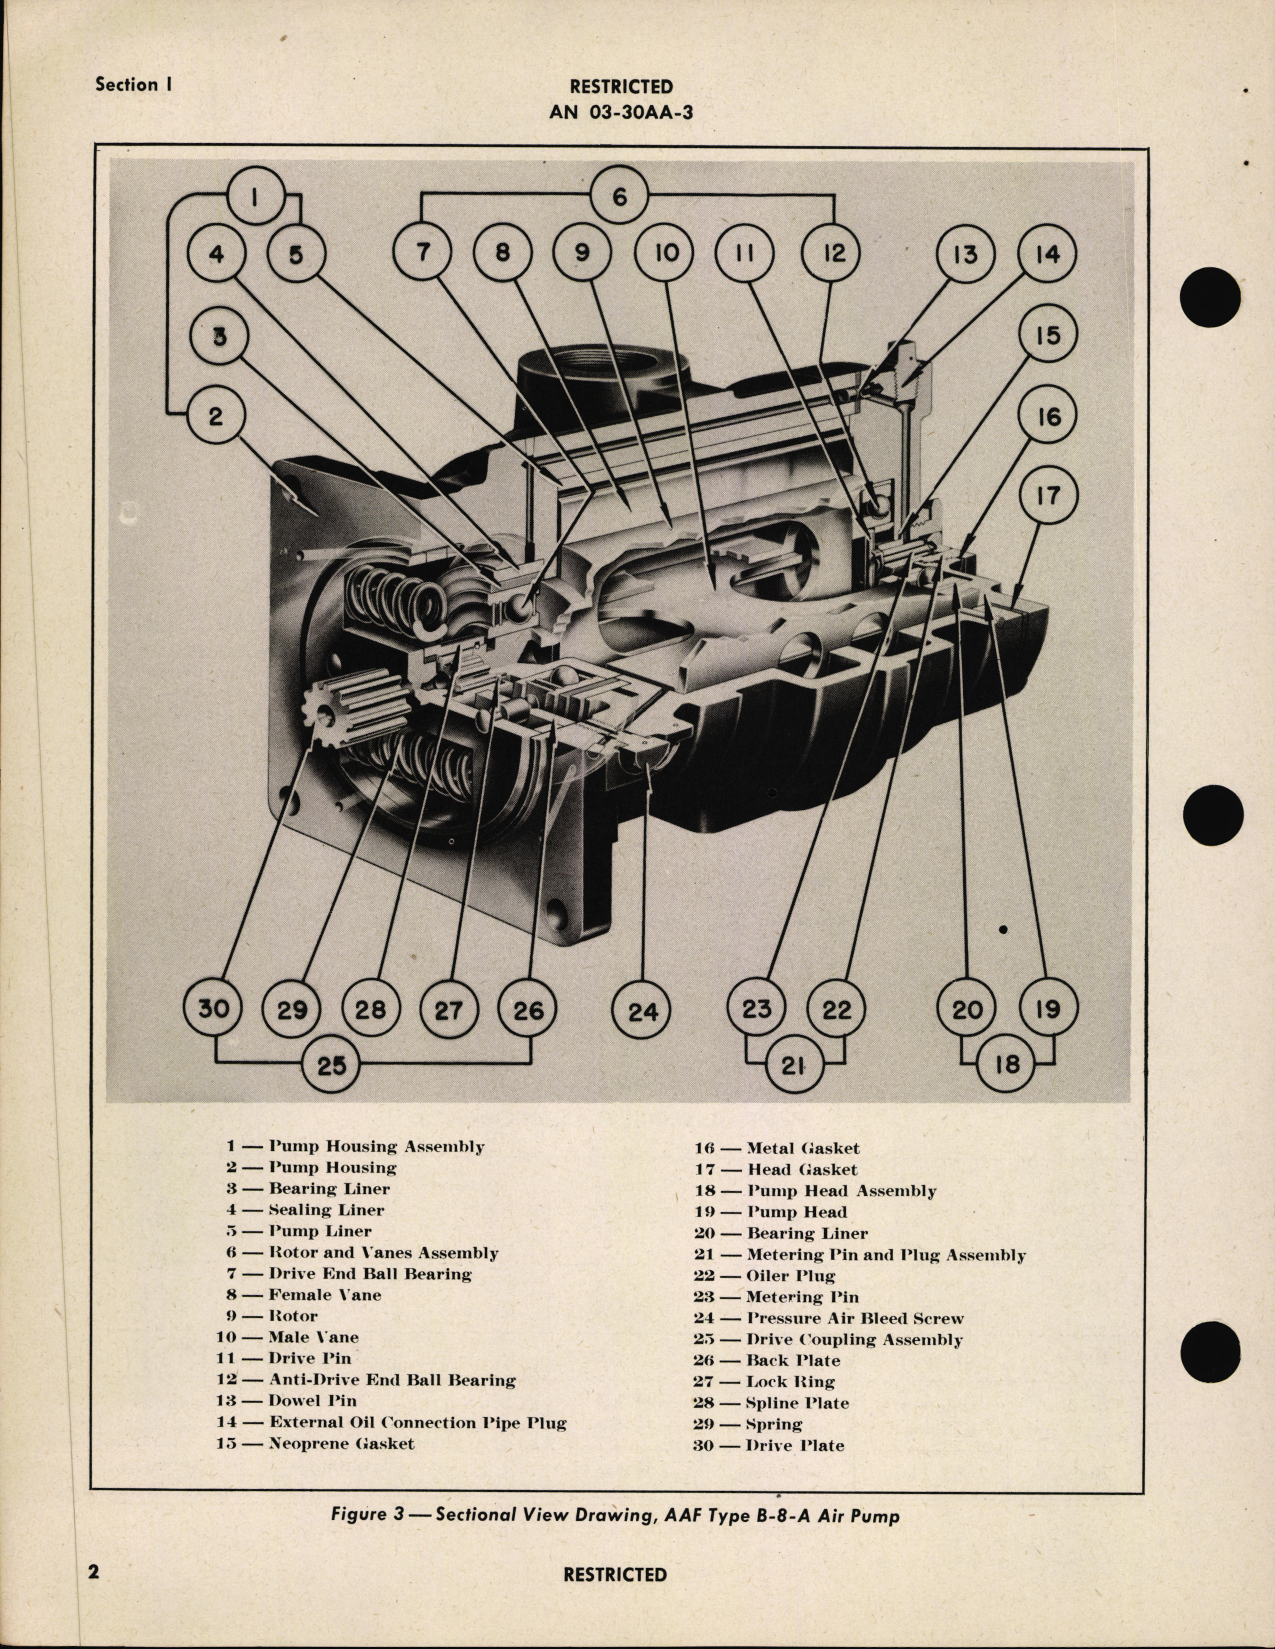 Sample page 6 from AirCorps Library document: Handbook of Instructions with Parts Catalog for Vane type Engine Driven Air Pump